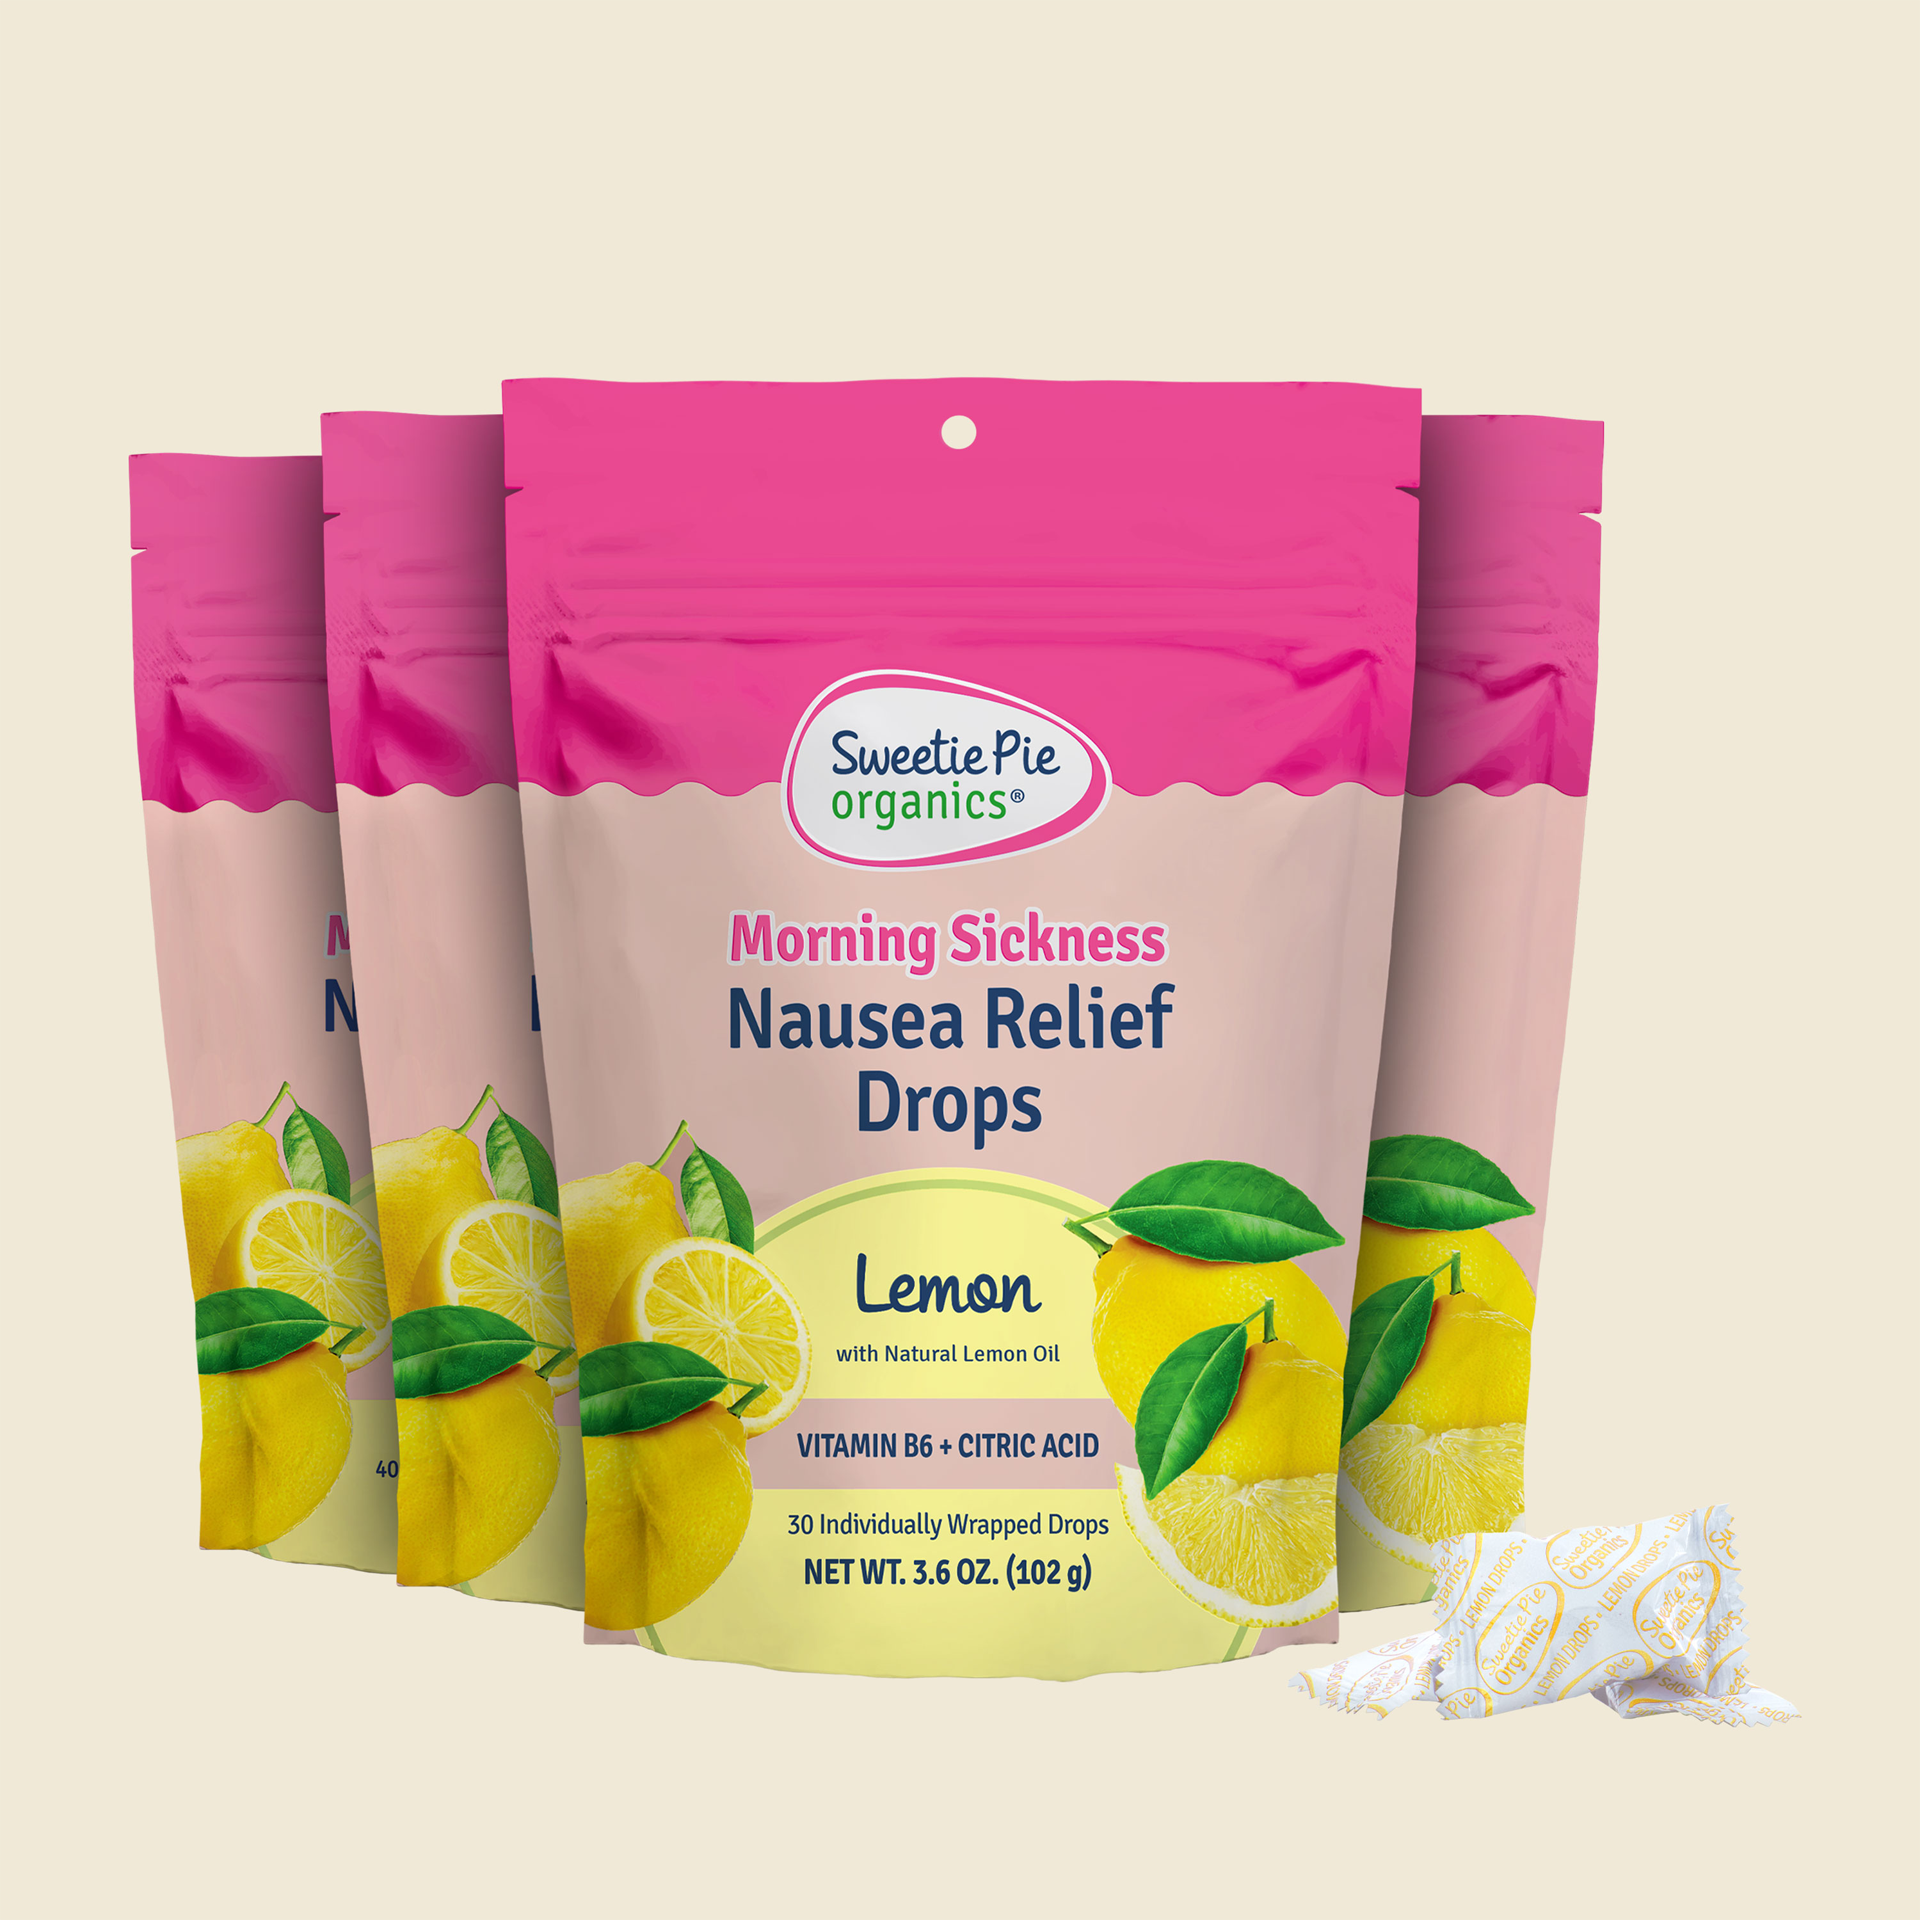 Group of bags of Sweetie Pie's lemon flavored nausea relief drops, with wrapped drop